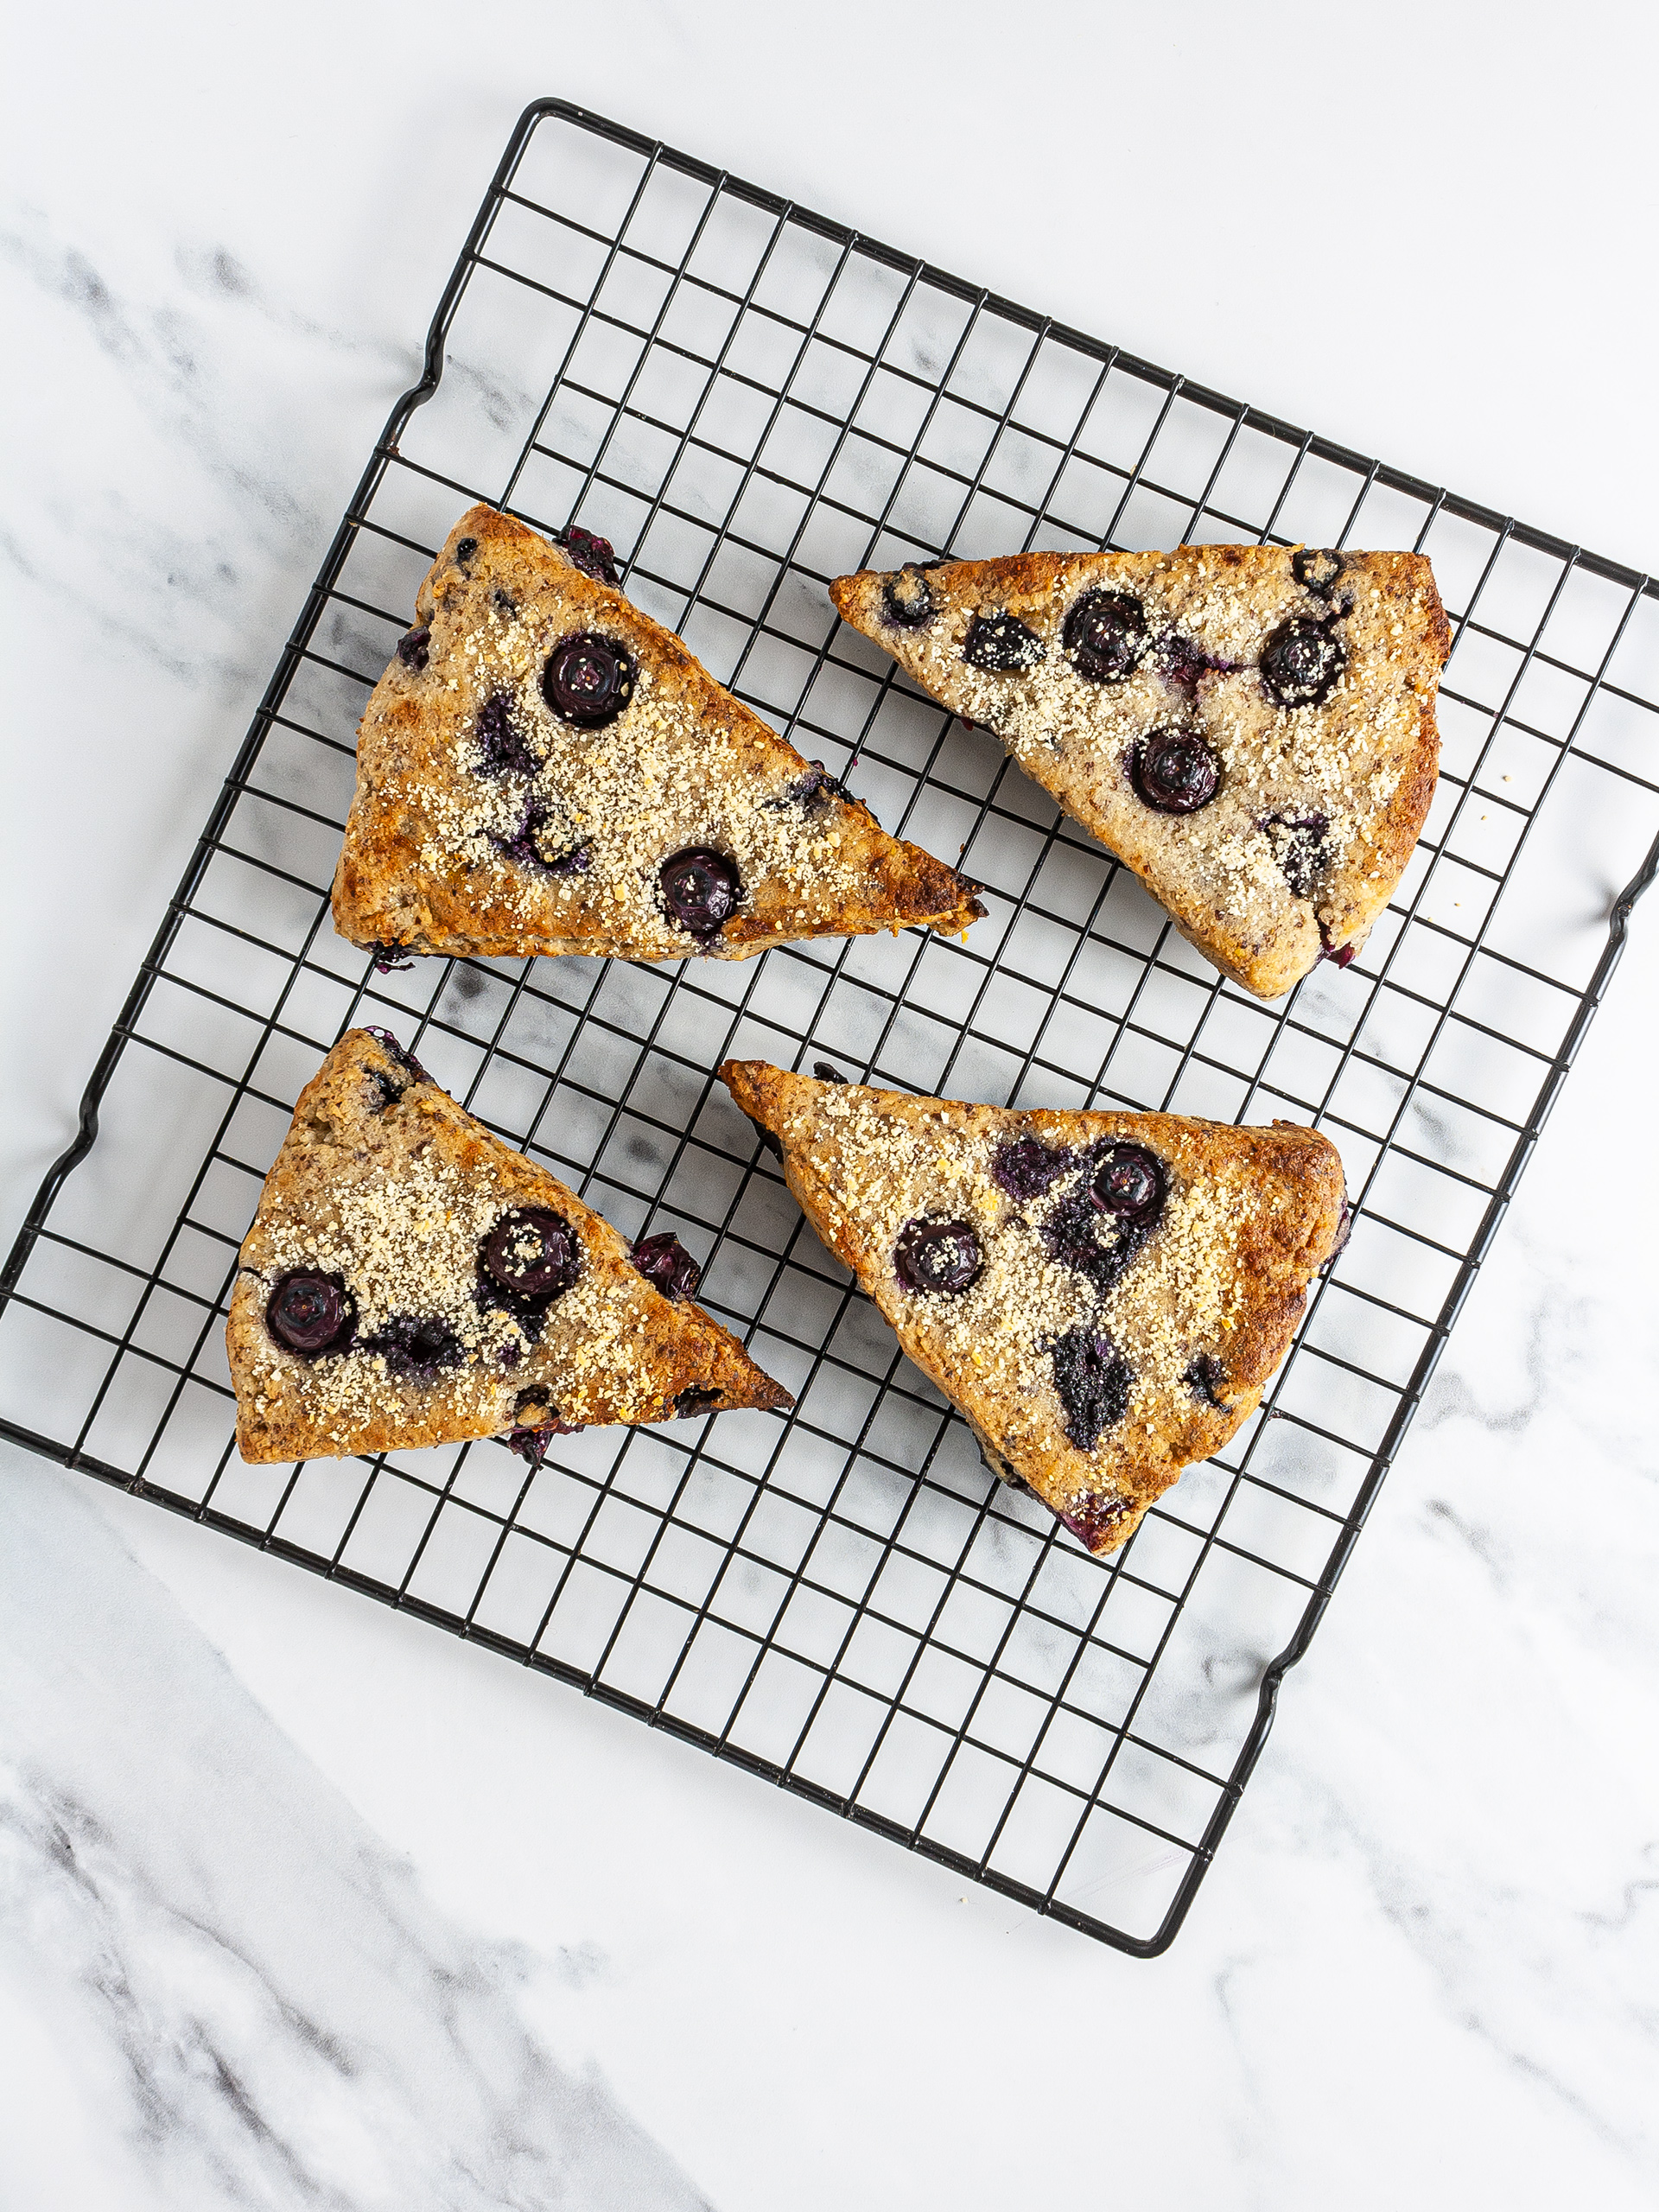 Baked blueberry scones on a cooling tray